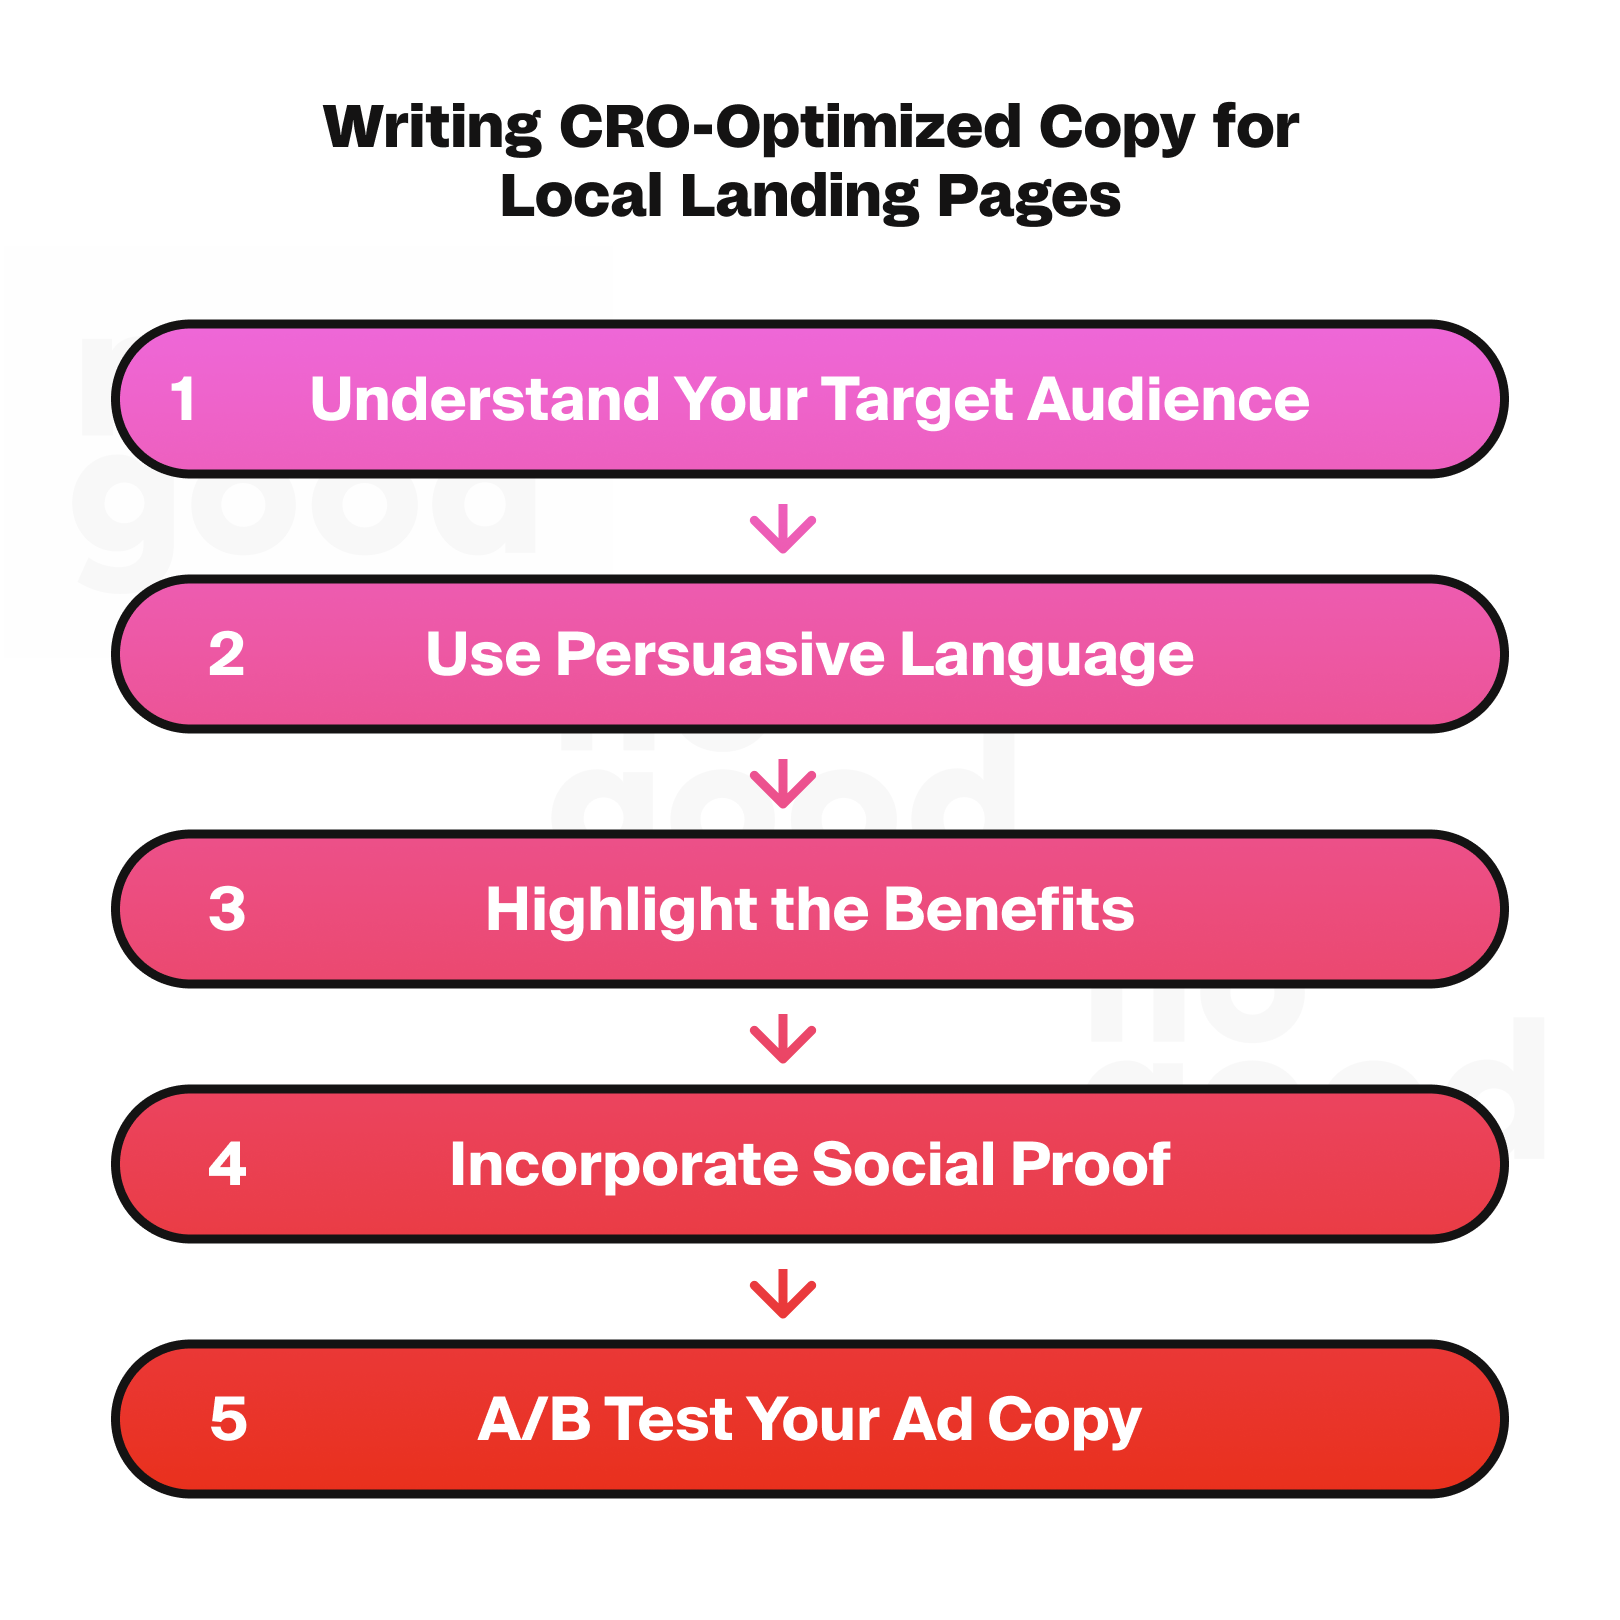 Writing CRO-optimized copy for local landing pages